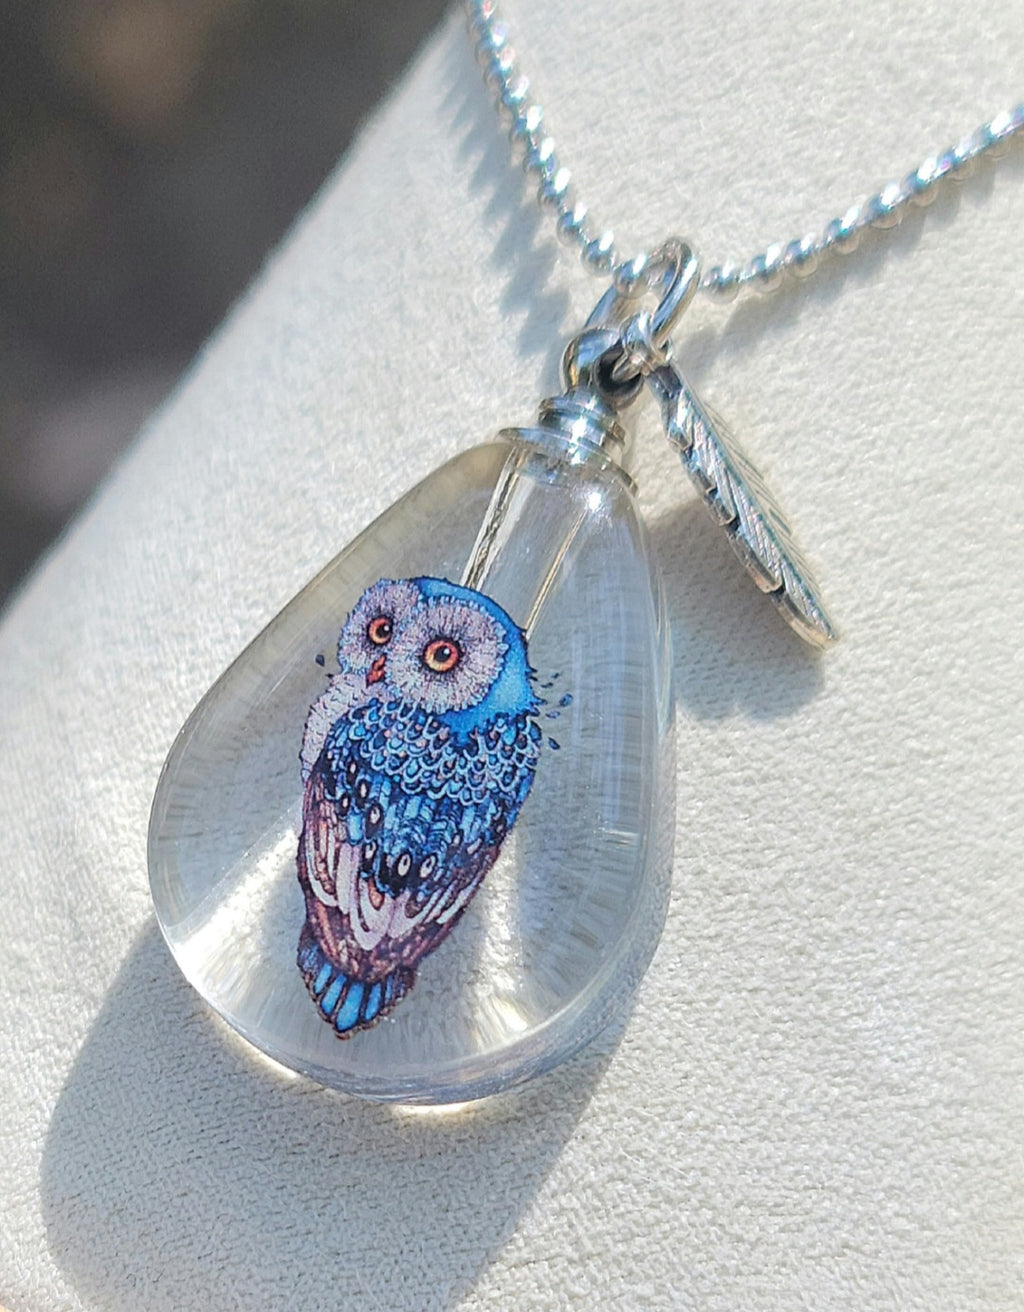 DIY Owl Feather Wing Cremation Urn Crystal Bottle Necklace Fill Yourself